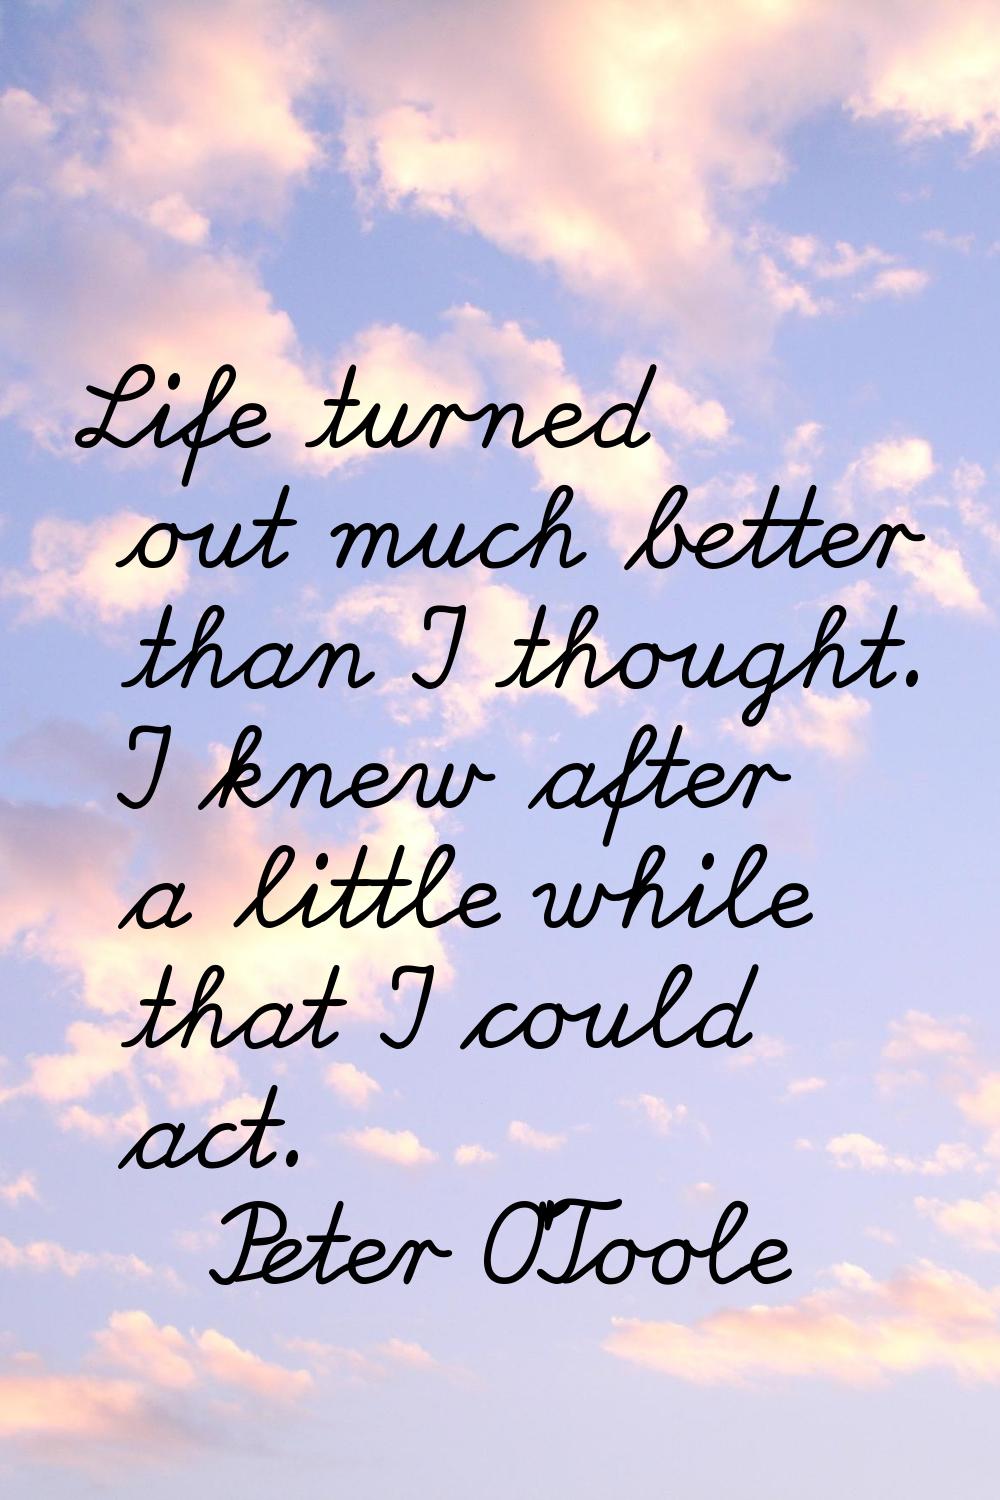 Life turned out much better than I thought. I knew after a little while that I could act.